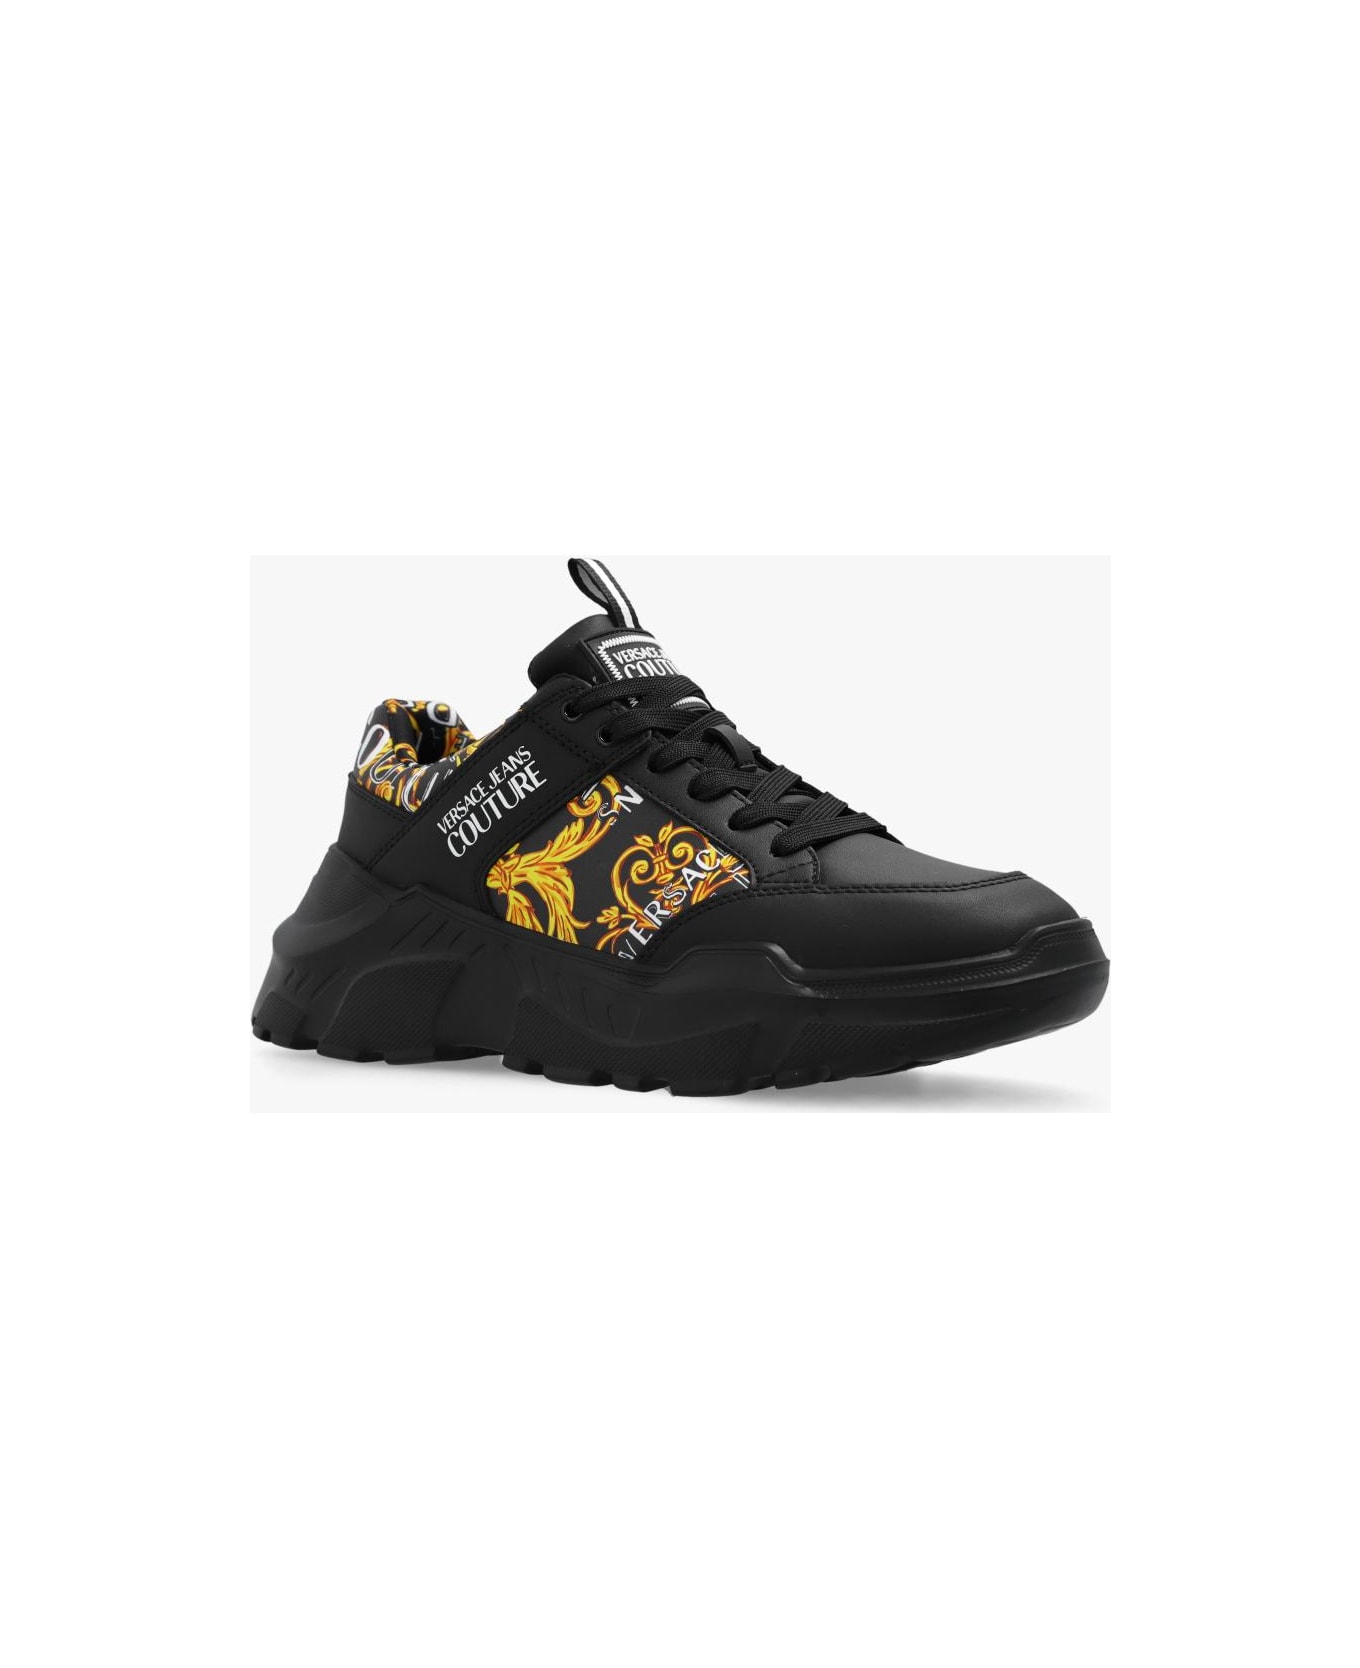 Versace Jeans Couture 'speedtrack' Sneakers - Black/gold